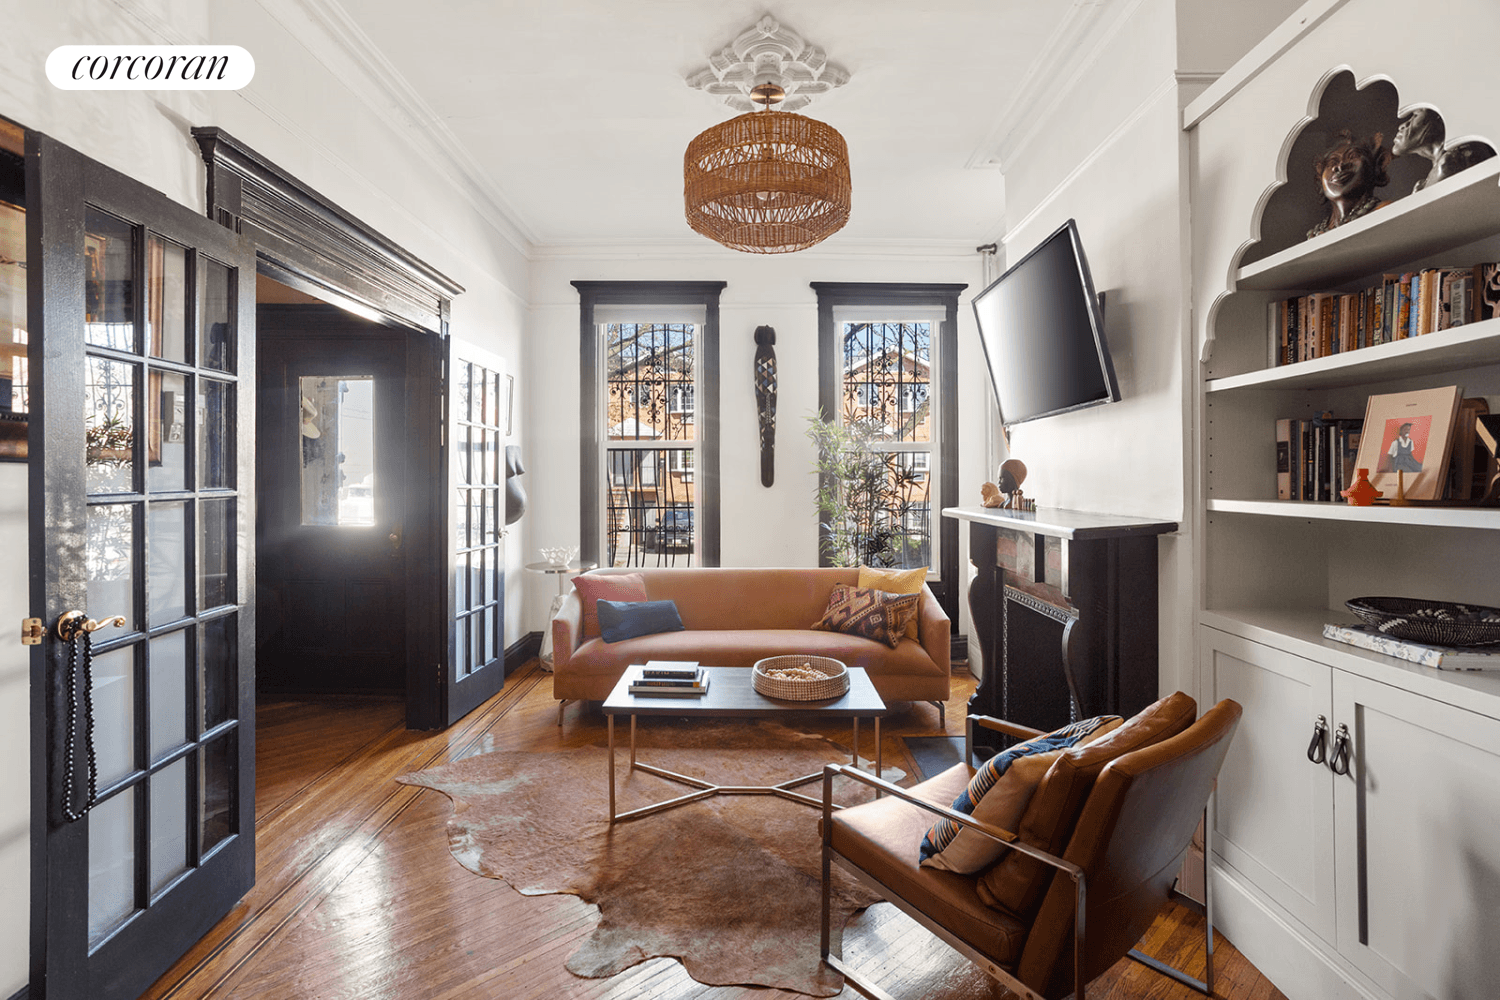 Charming single family home with original architectural details like hardwood flooring, mantles and woodwork in the historic Weeksville section of Crown Heights all 3 floors of this home have an ...